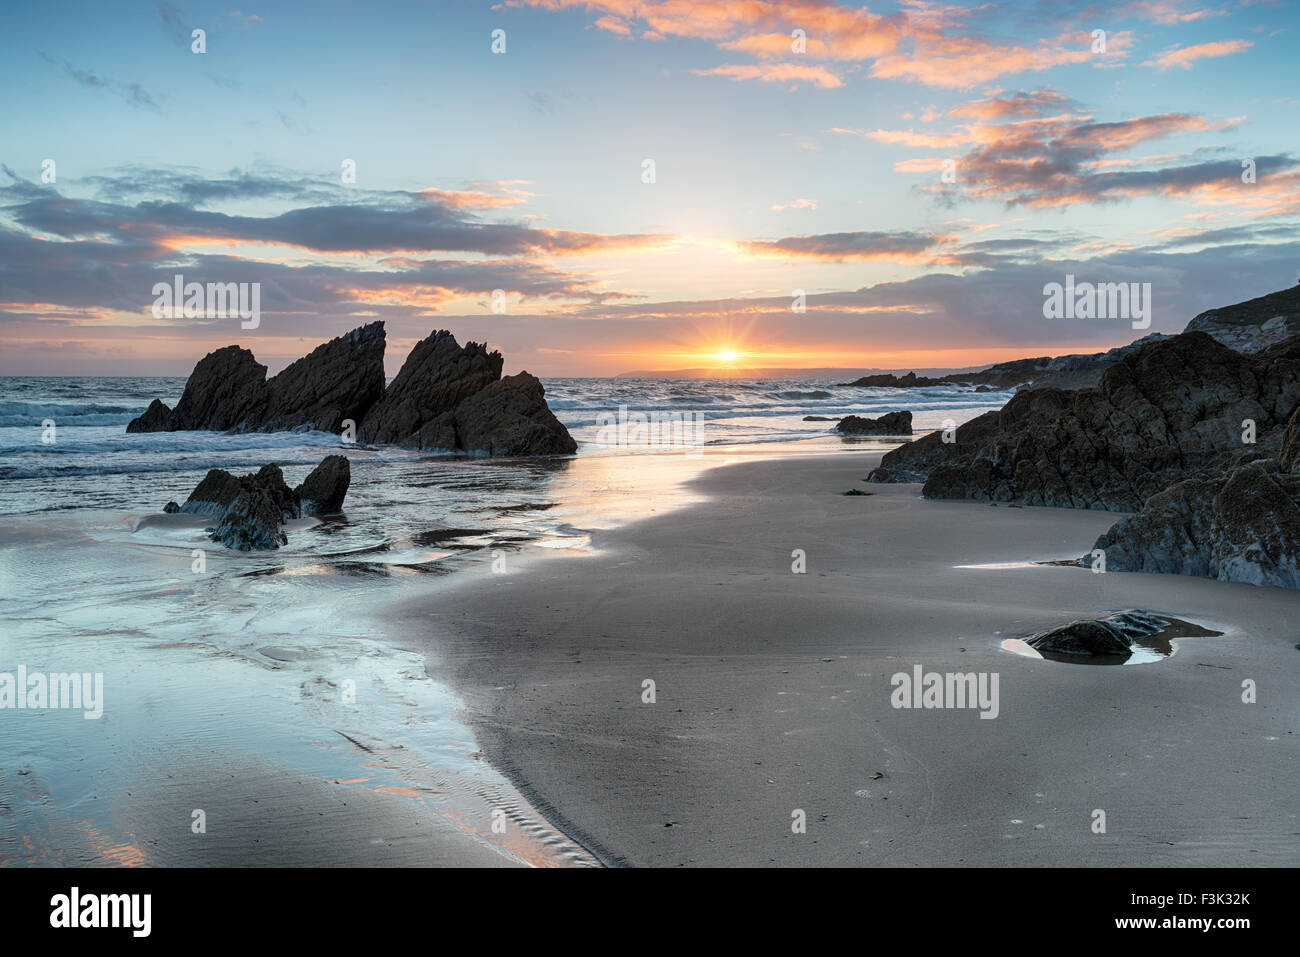 Beautifull sunset on the beach at Freathy in Whitsand bay on the south coast of Cornwall Stock Photo